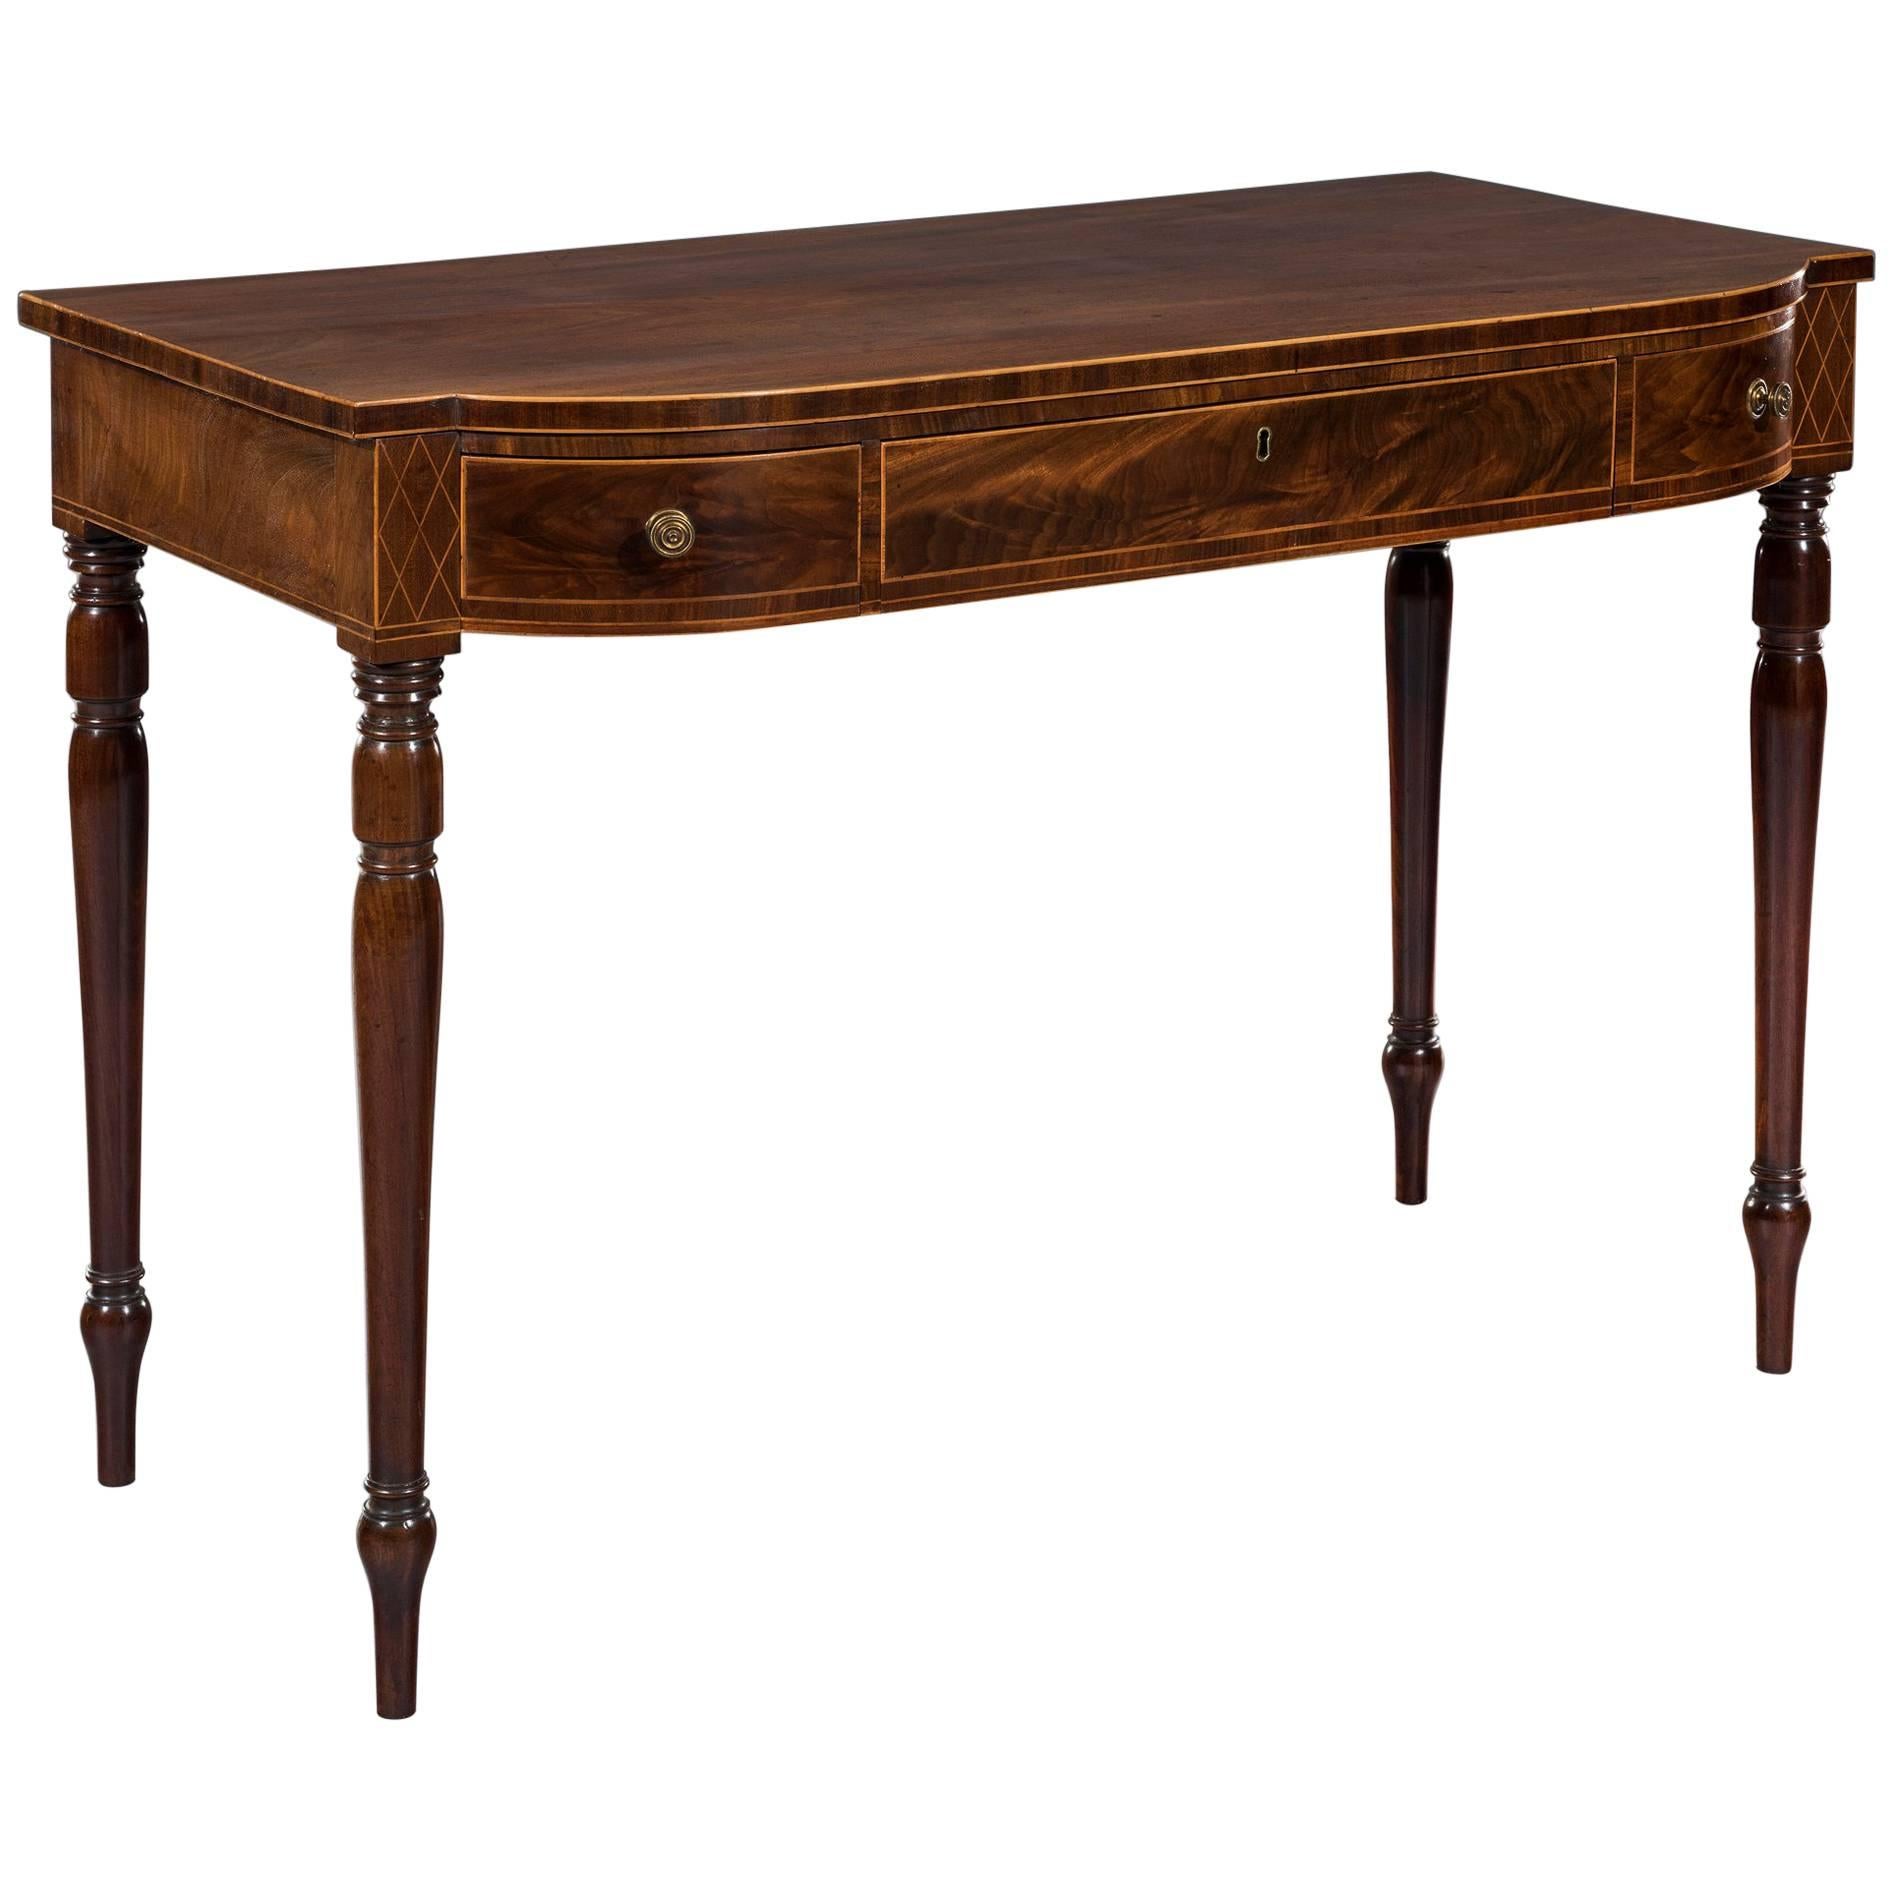 Late Georgian Bow Fronted Mahogany Console Table